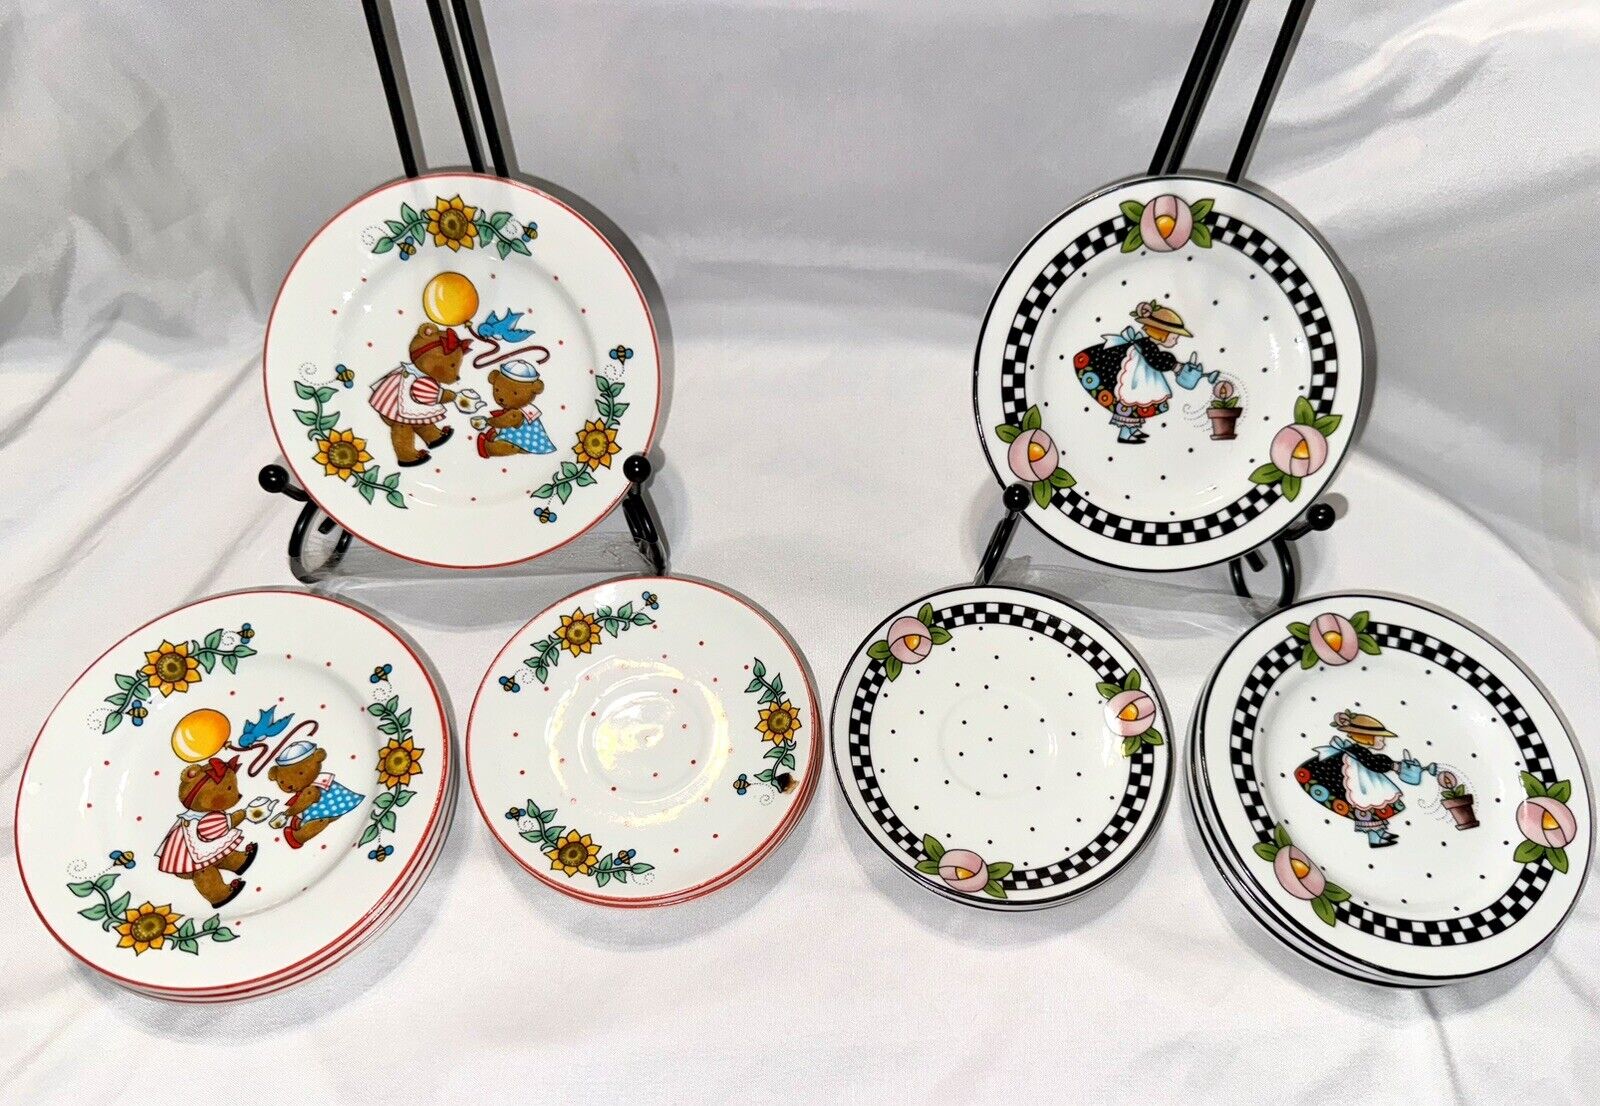 Mary Engelbreit Mini Tea Set Replacement Pieces From 2 Sets Plates And Saucers